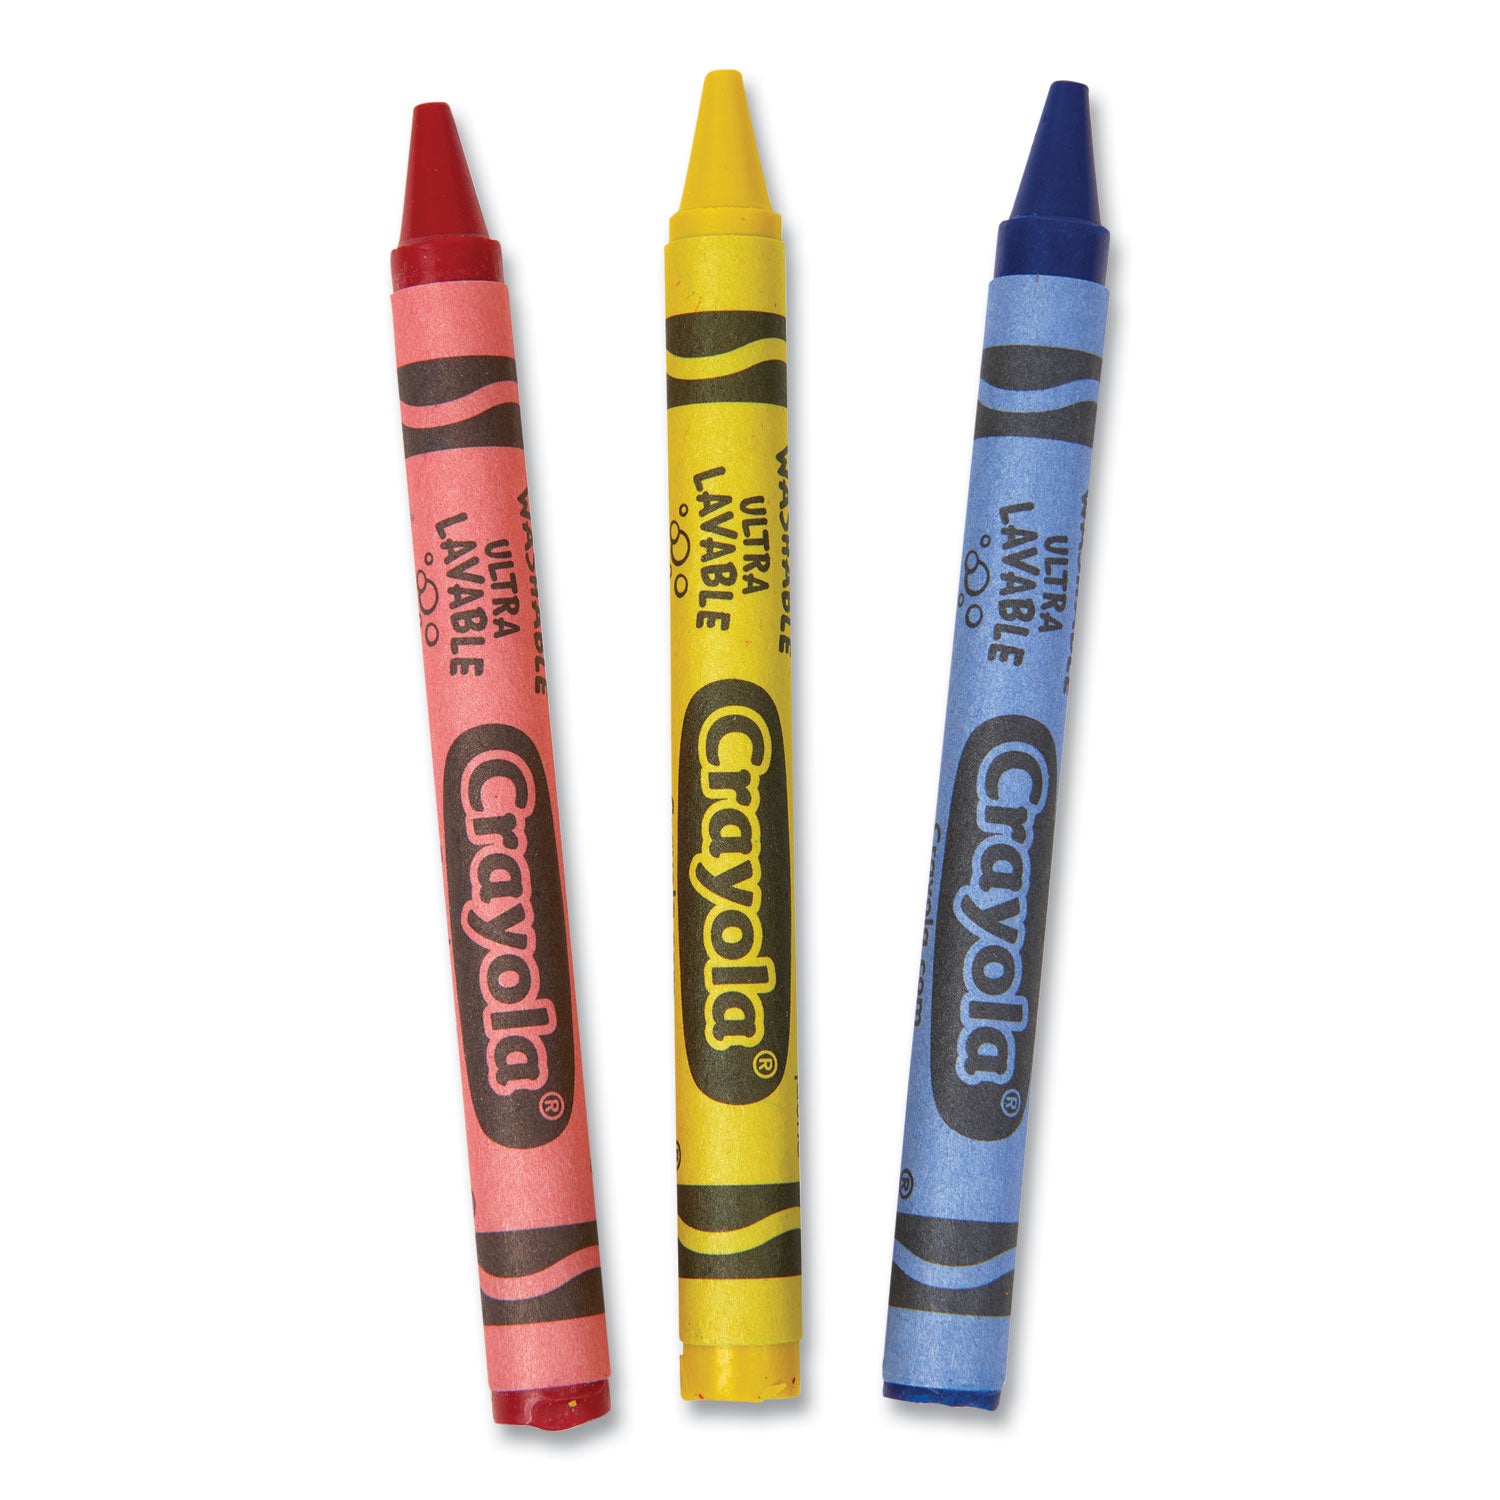 washable-crayons-blue-red-yellow-3-pack-360-packs-carton_cyo520743 - 2